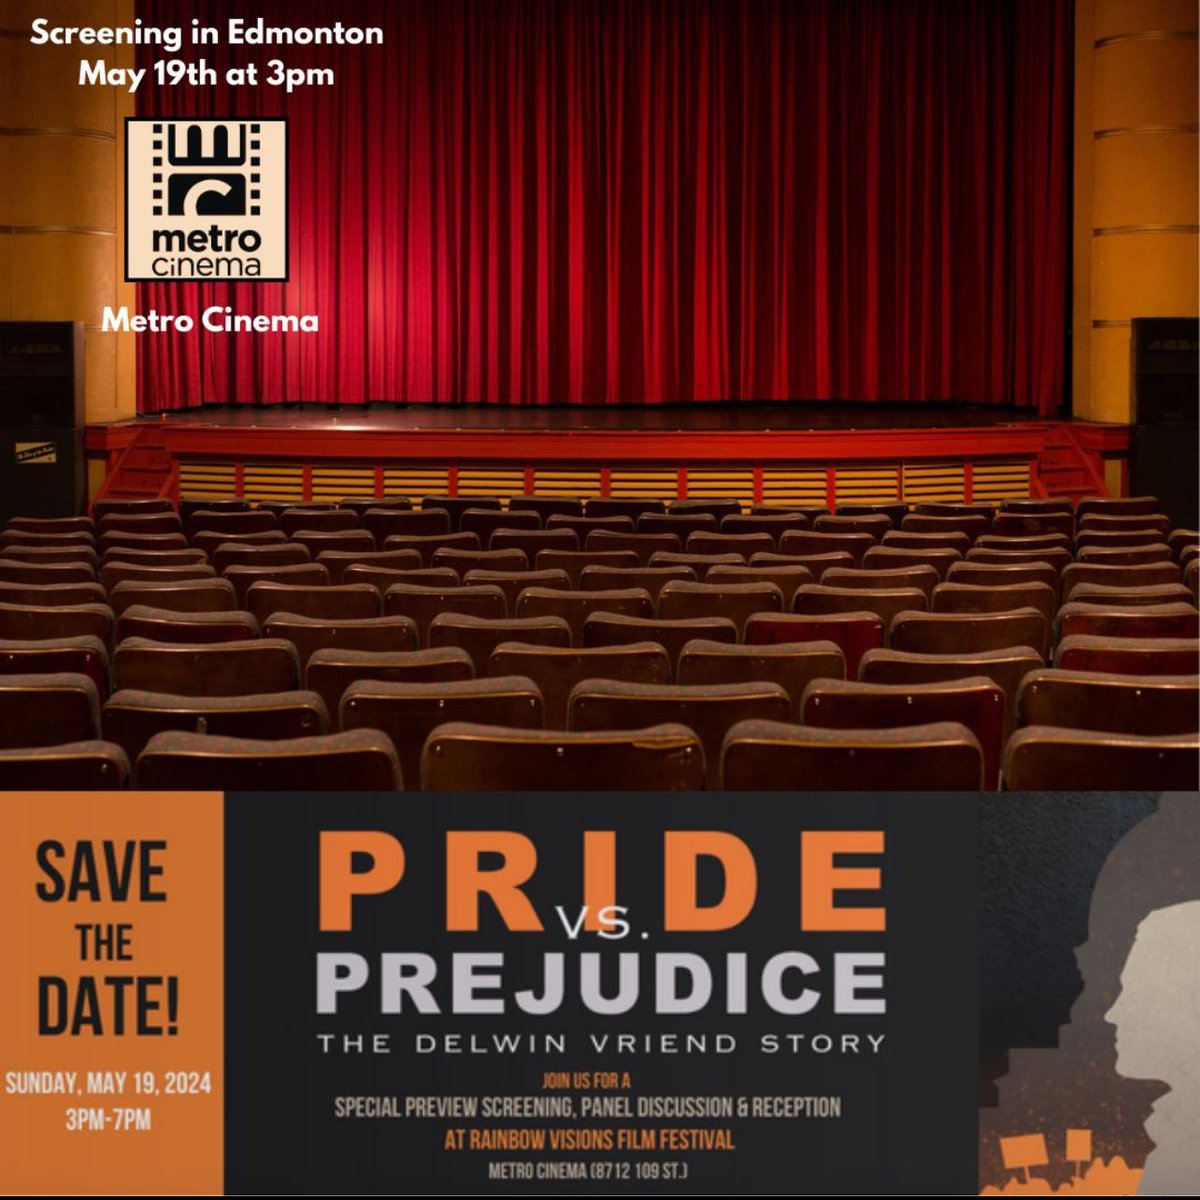 Save the date! Join us for this special preview screening of our new feature film documentary.

I’m uncertain times, we need hope and the courage of community. 

Learn more at: pridevsprejudice.com

#yeg #yegdt #yegpride #metrocinema #RainbowVisions